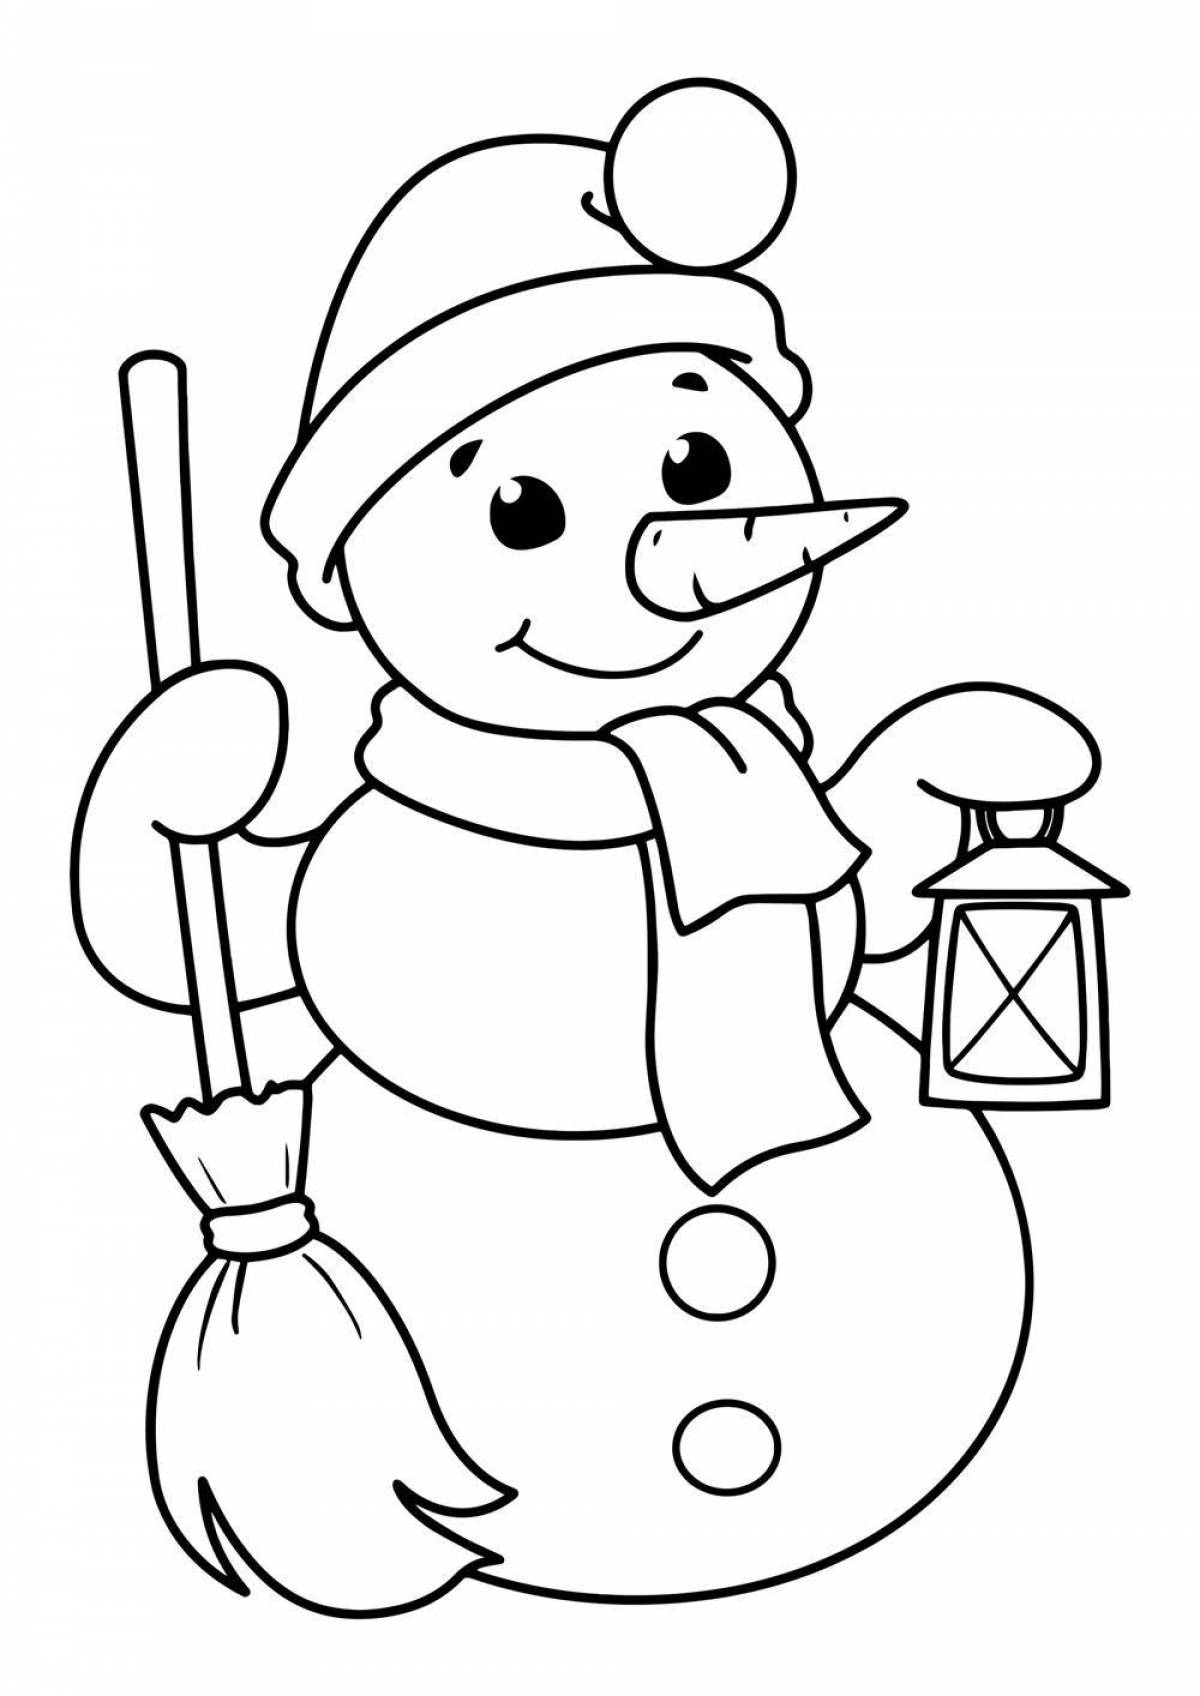 Playful children's Christmas coloring book